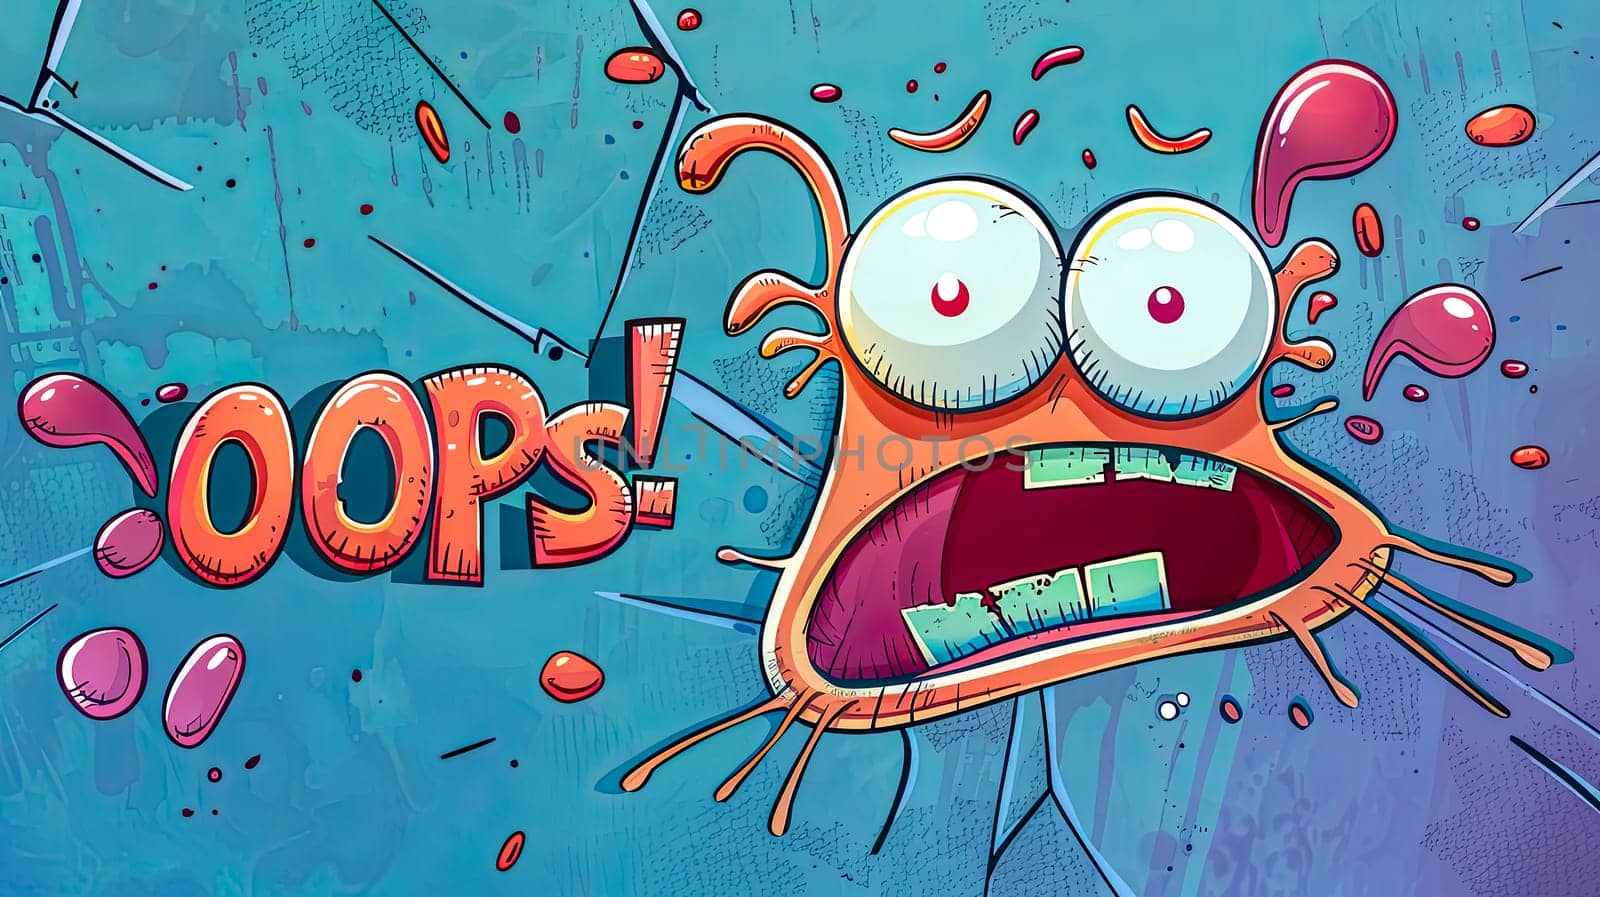 Vibrant illustration of a funny cartoon character with a surprised face and oops! text bubble